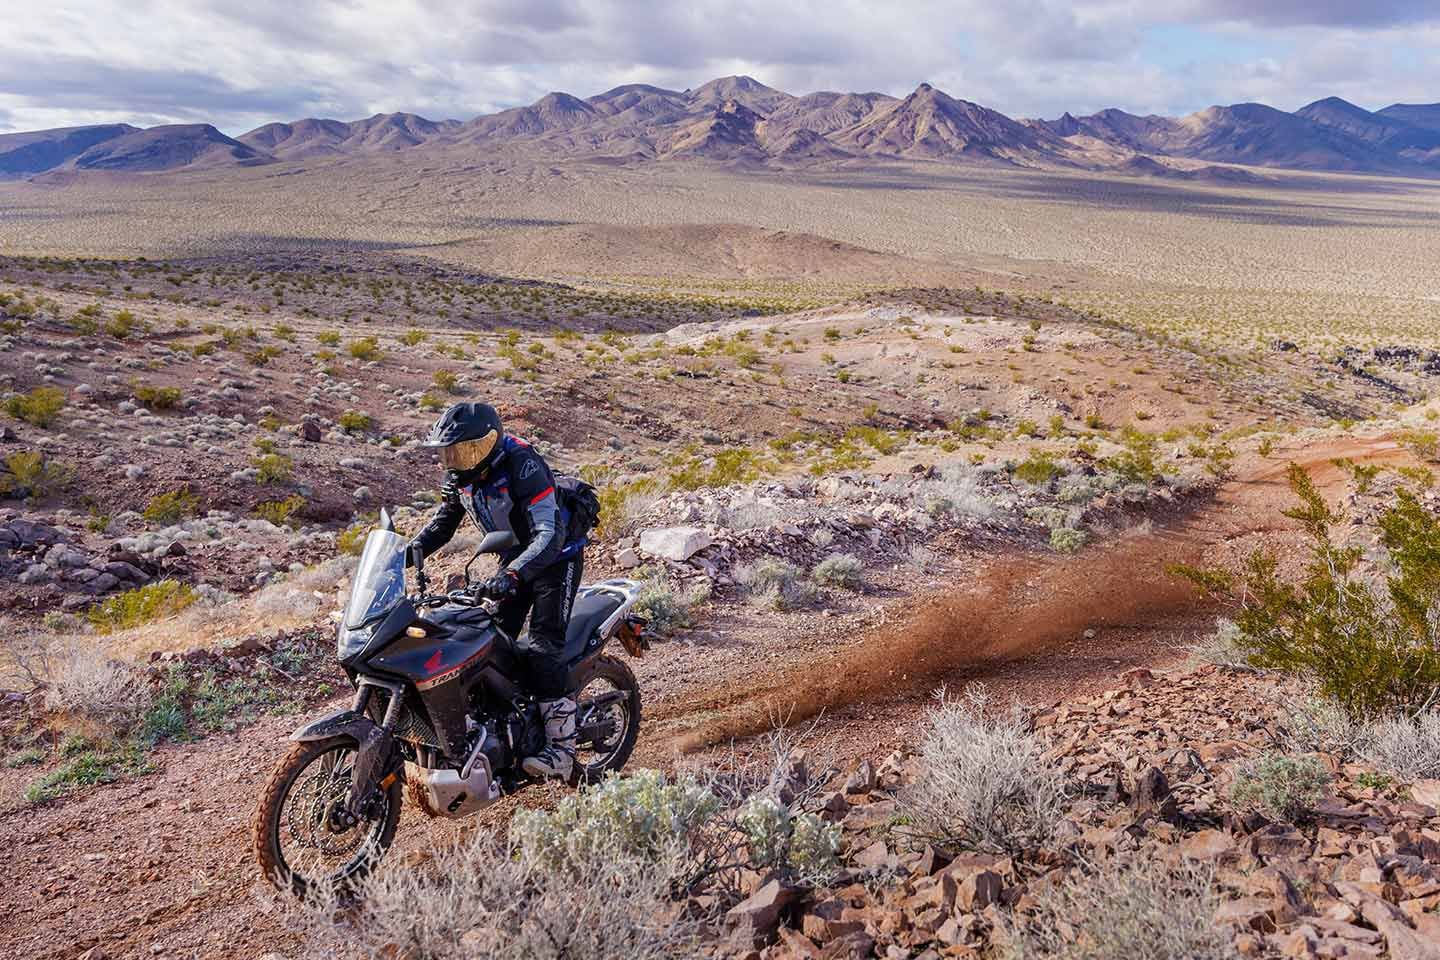 We try out Alpinestars’ Tech-Air off-road vest in this review.